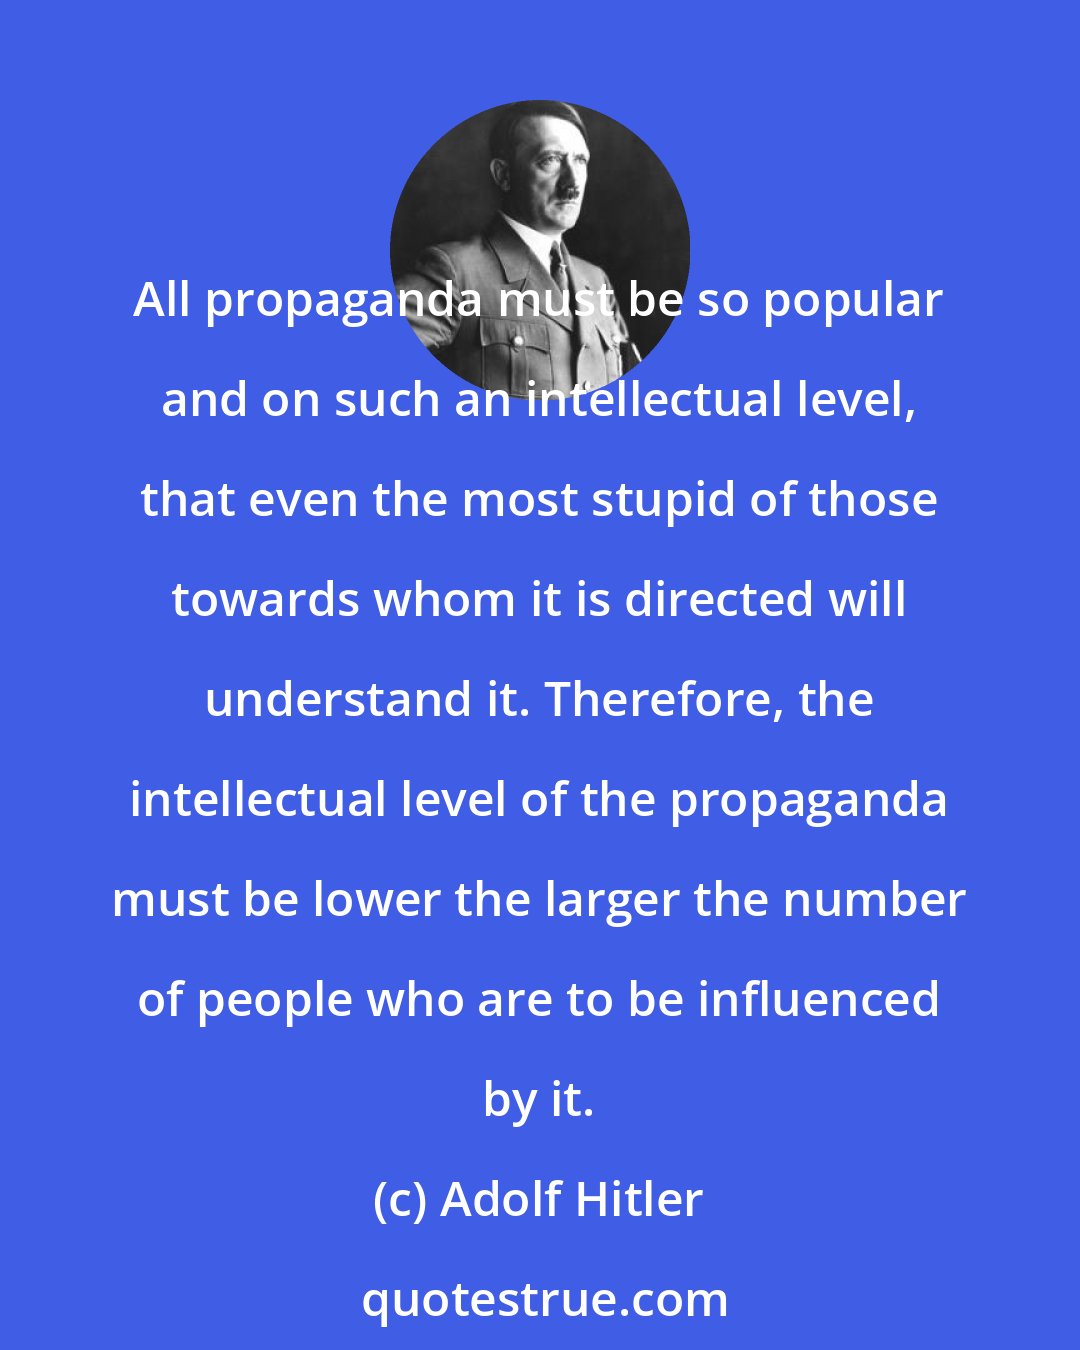 Adolf Hitler: All propaganda must be so popular and on such an intellectual level, that even the most stupid of those towards whom it is directed will understand it. Therefore, the intellectual level of the propaganda must be lower the larger the number of people who are to be influenced by it.